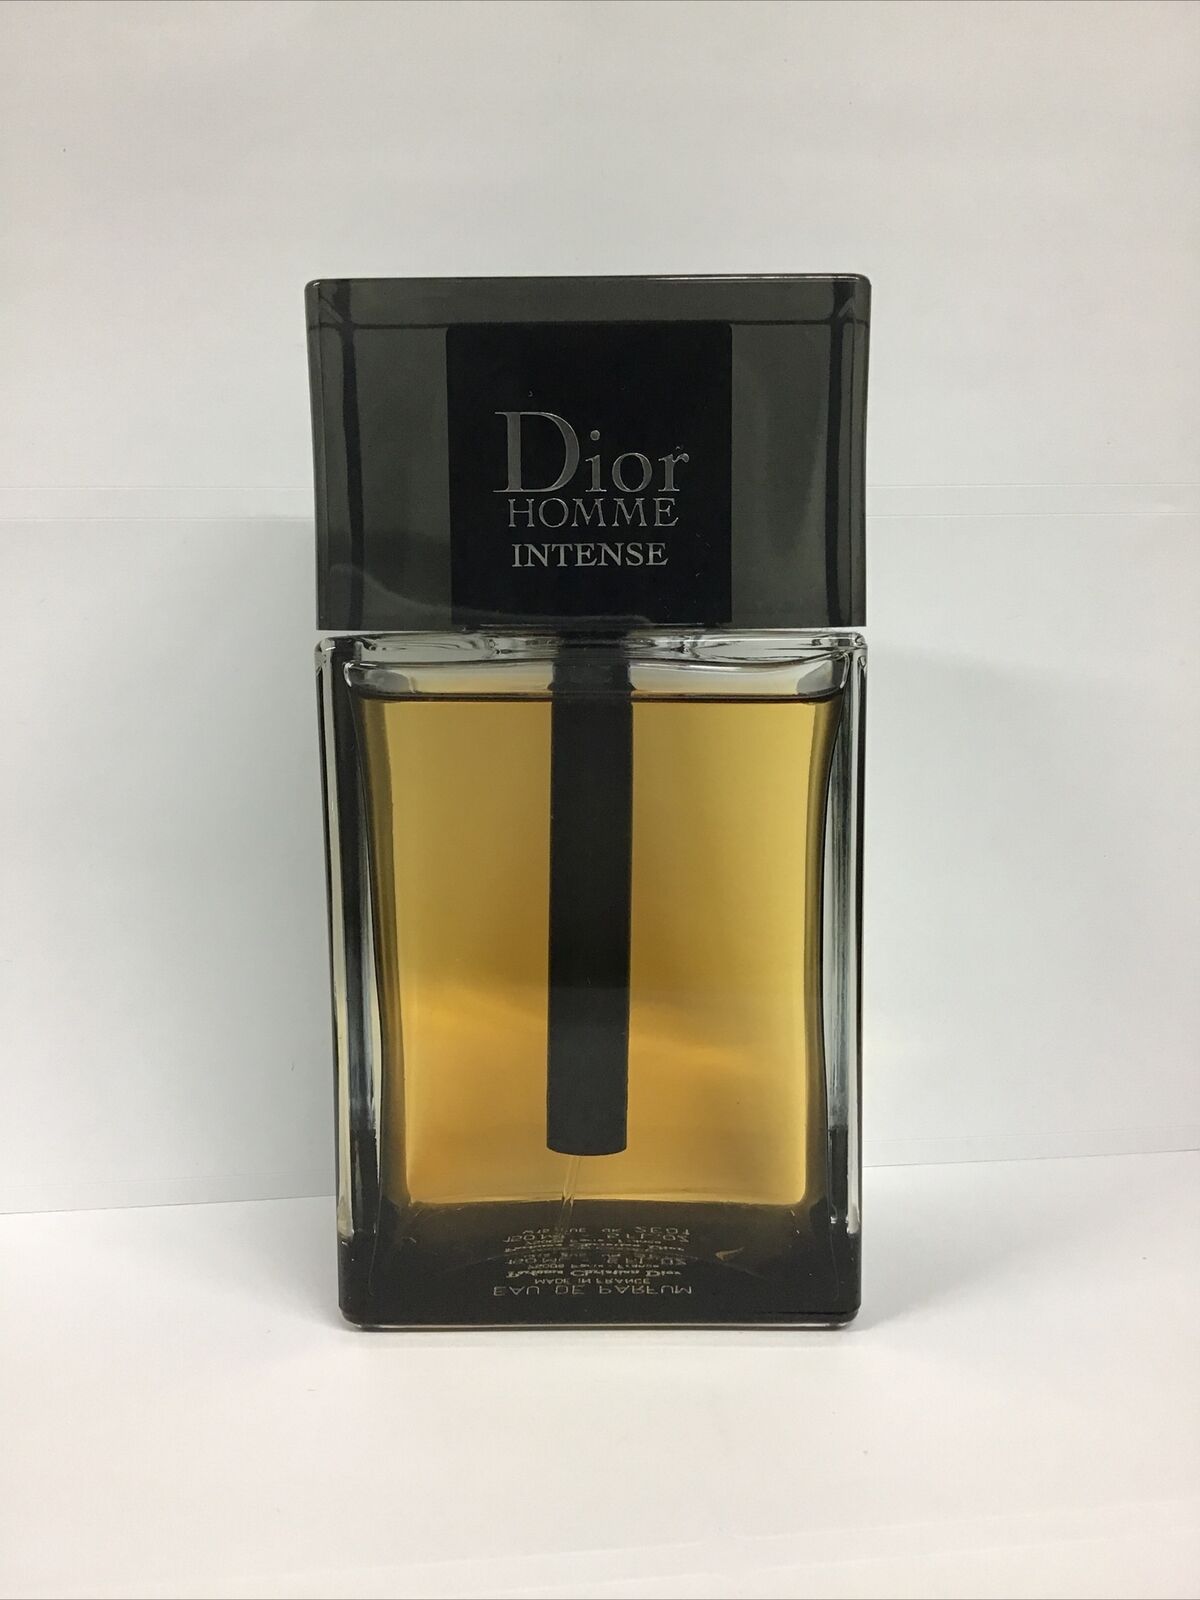 Dior Homme Intense Christian Dior EDP 5 FL OZ 95%full as Pictured No Box